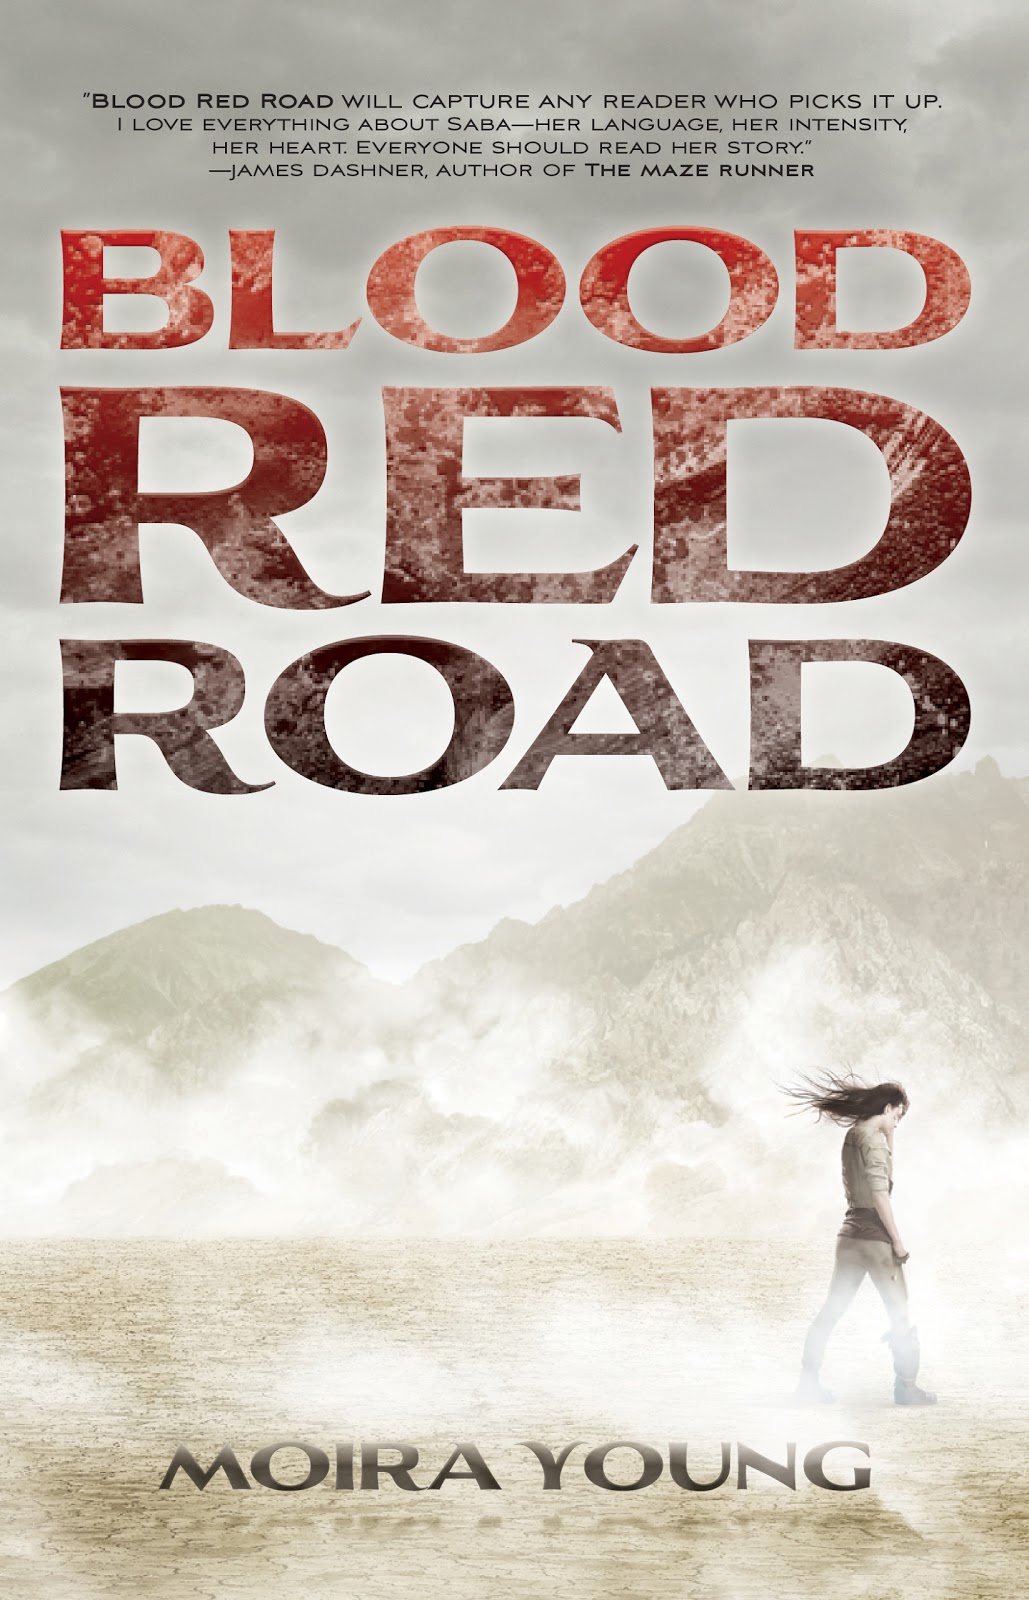 The last book i read was. Moira young "Blood Red Road".